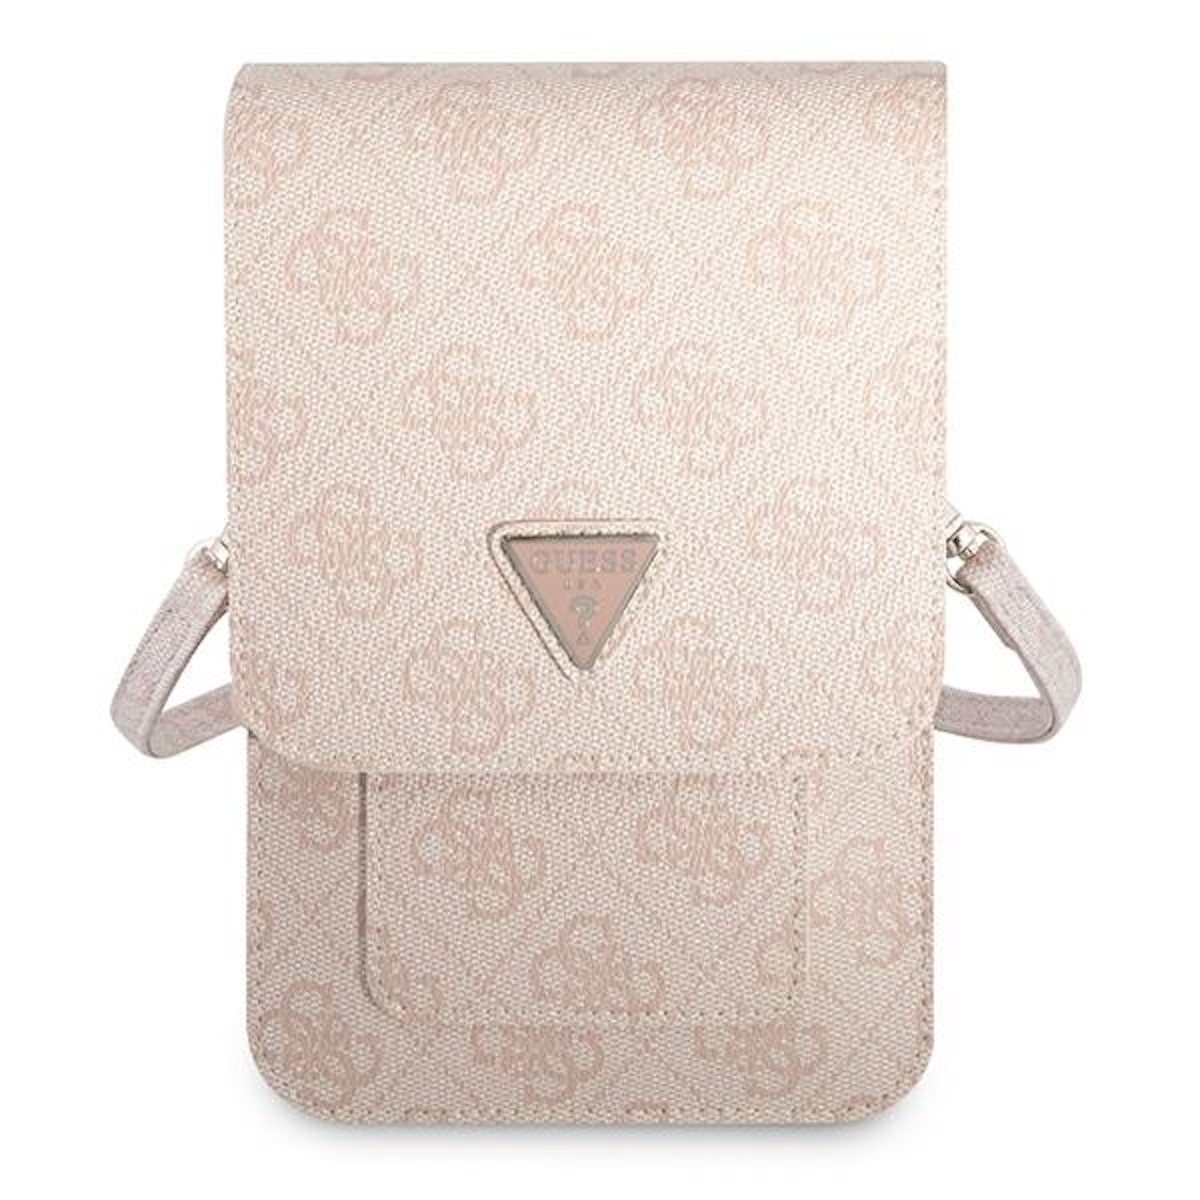 GUESS Torebka Triangle Rosa Cover, Umhängetasche, Universell, Tasche, Full Universelle